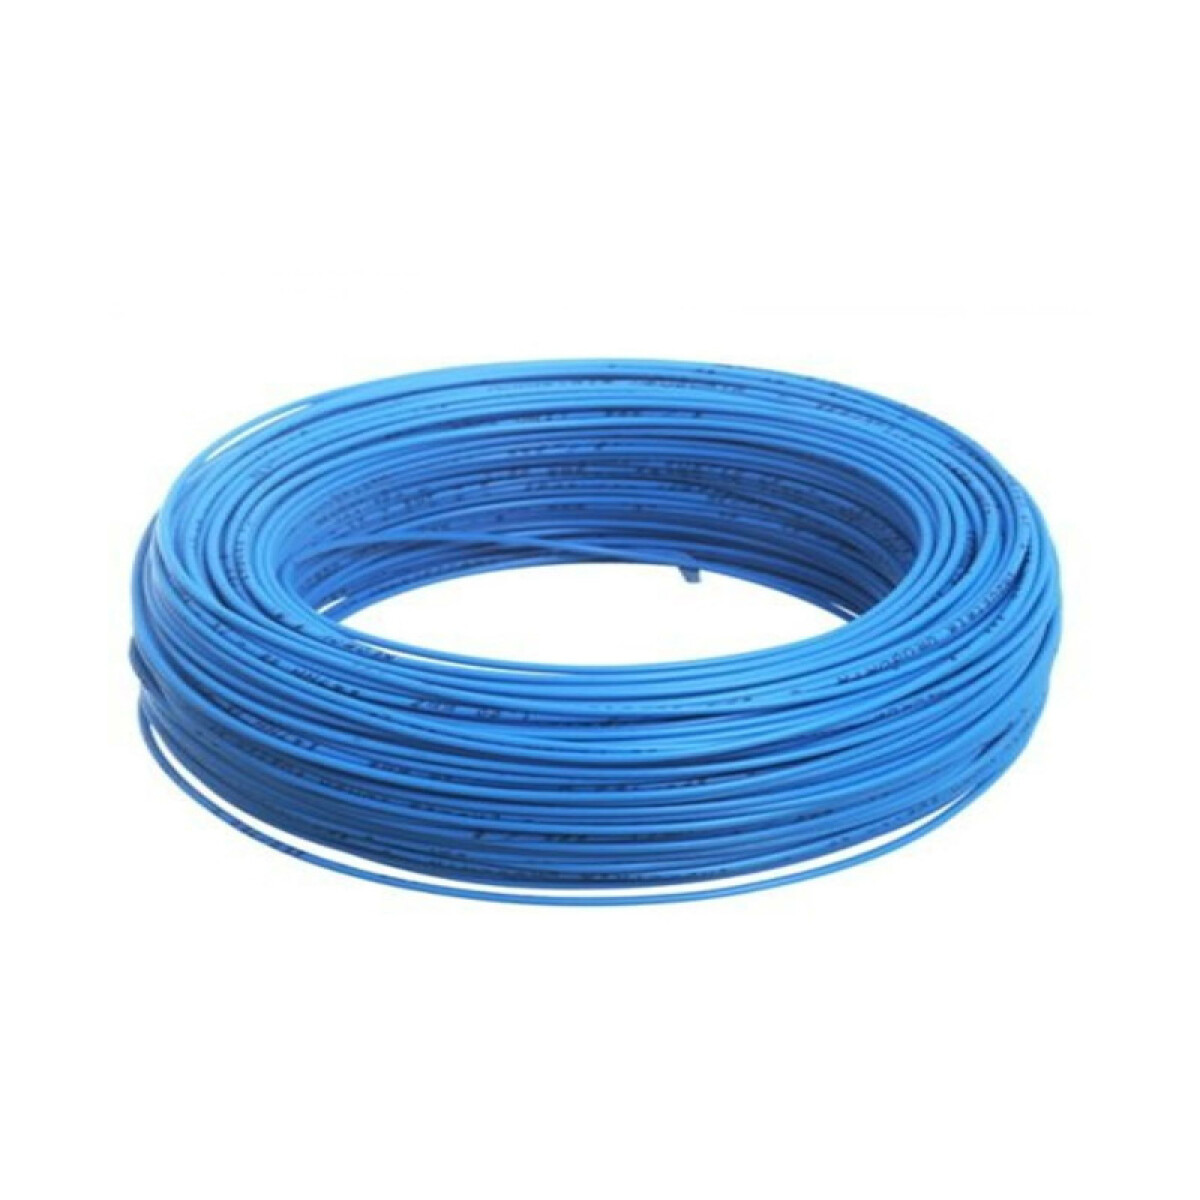 Cable Multifilar Ufex 2mm Azul 